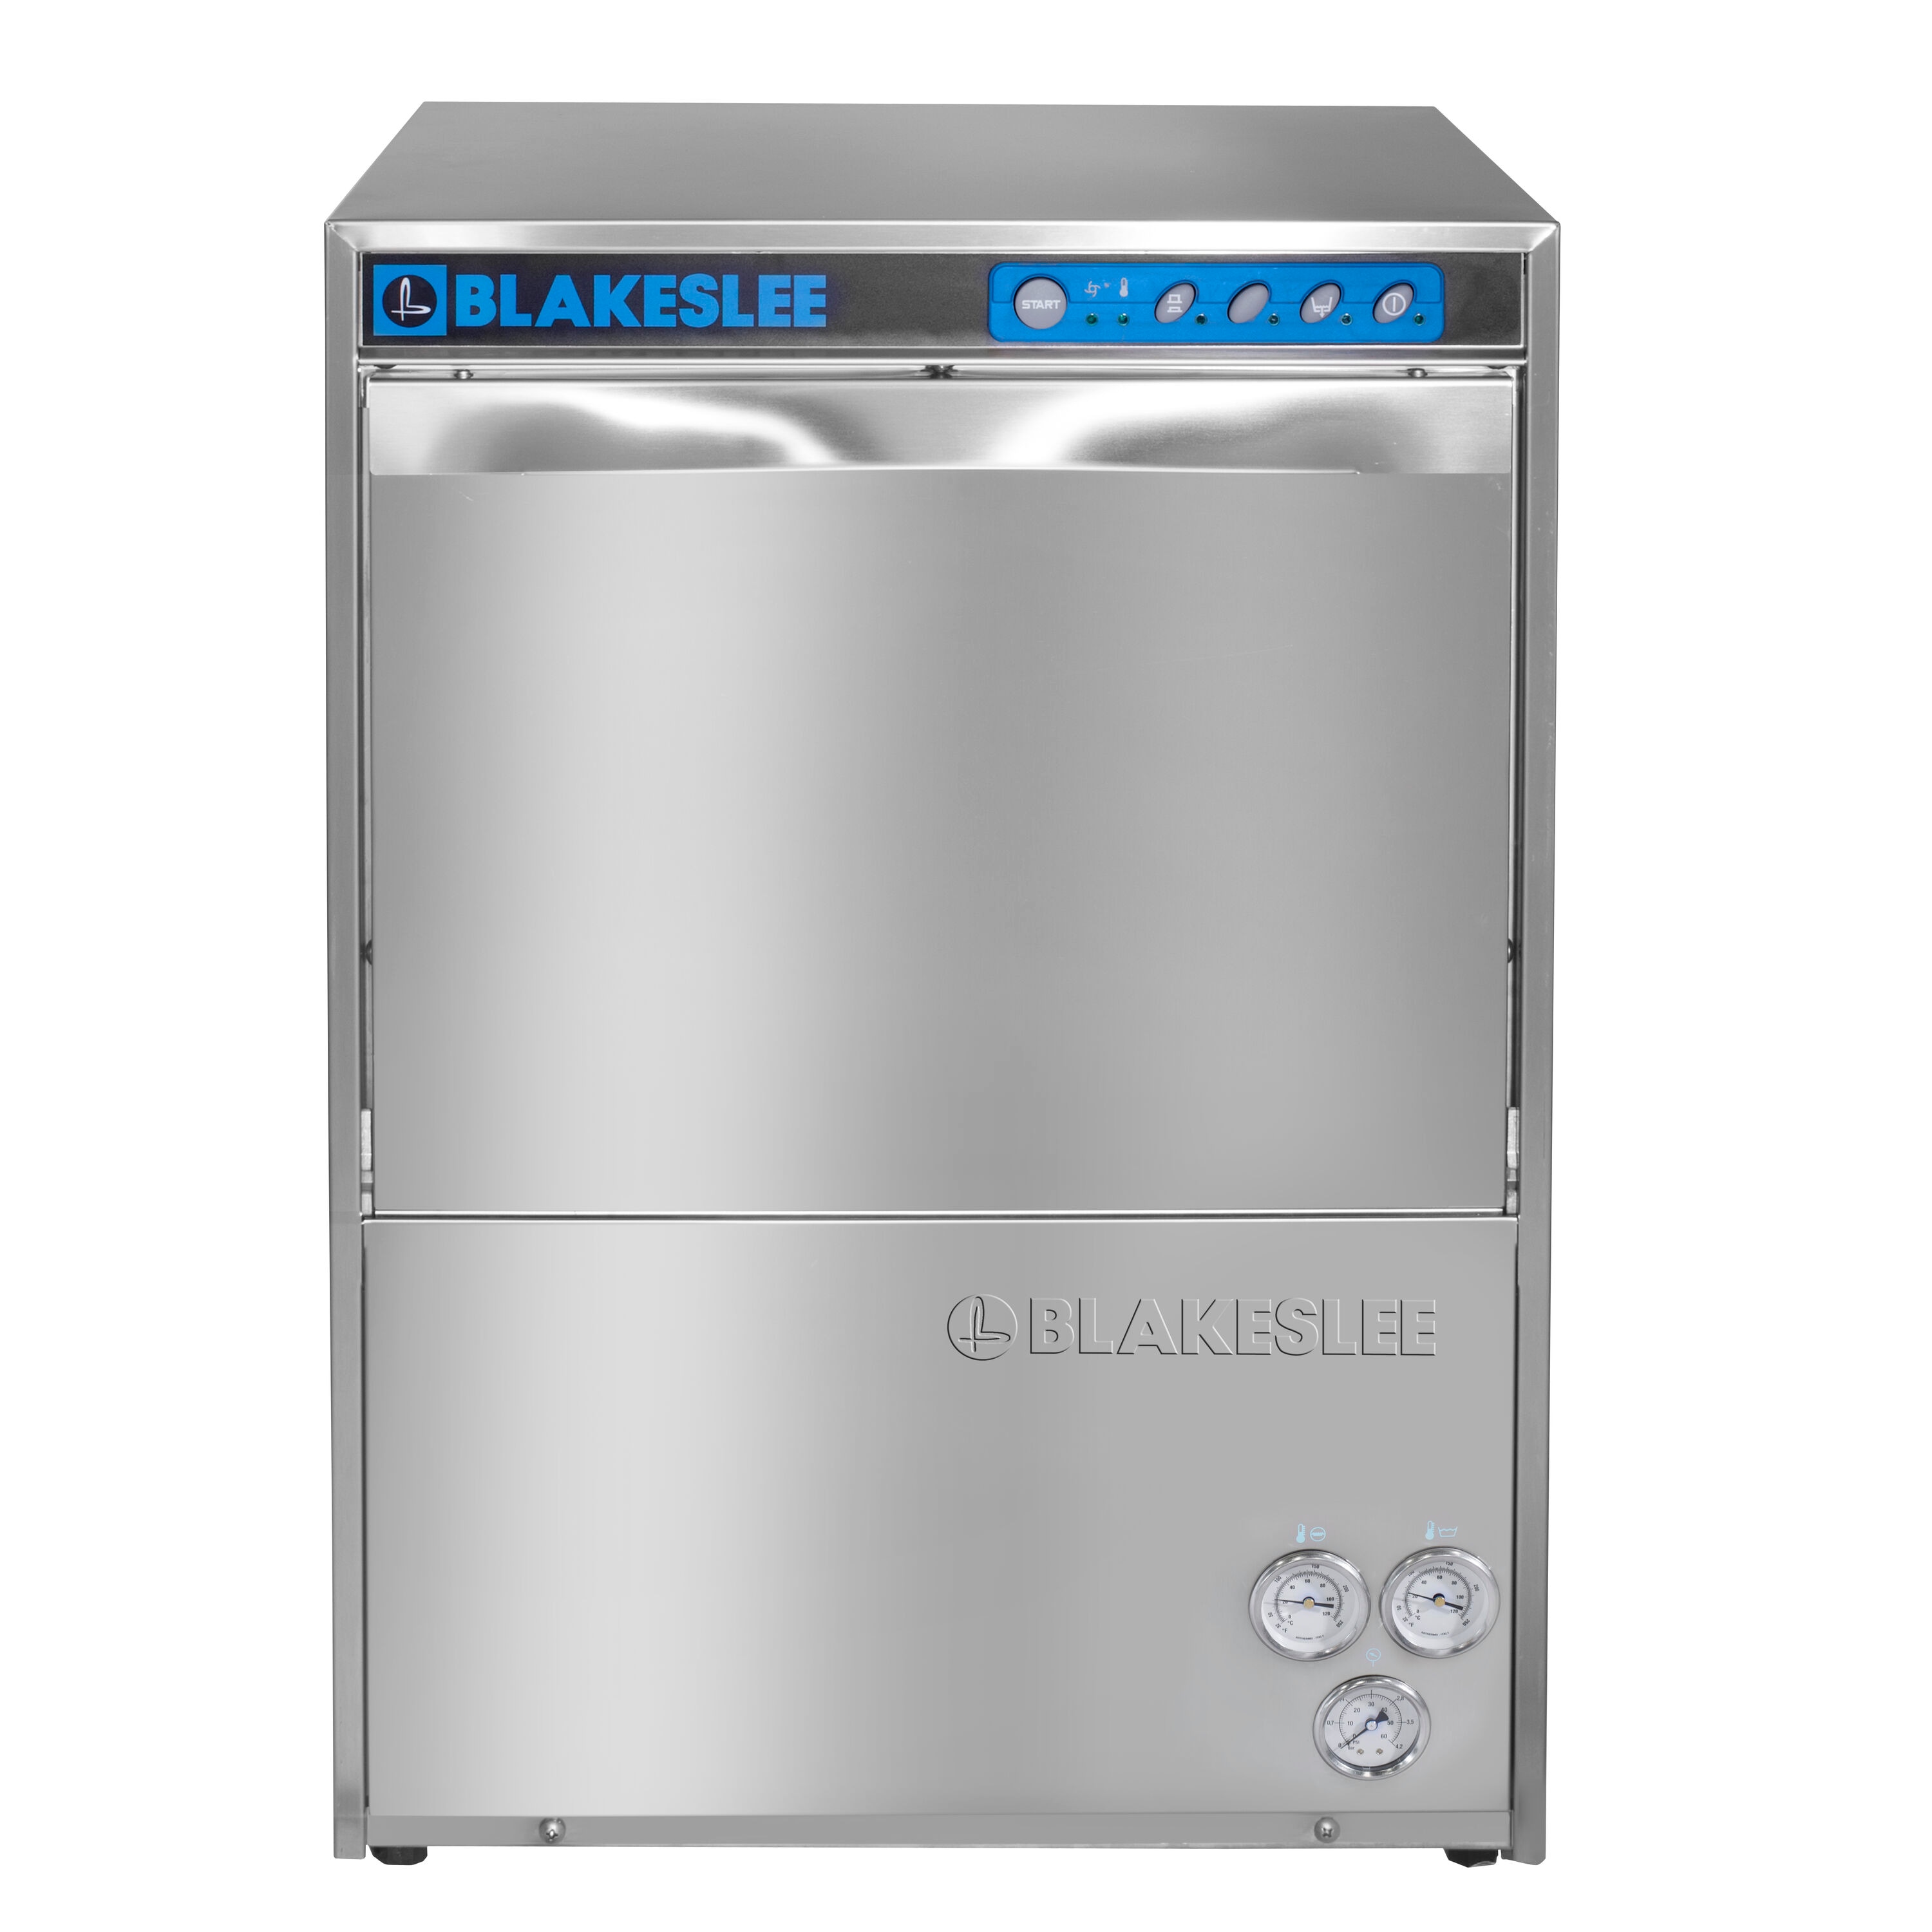 Commercial Dishwasher Sales in Buffalo, NY